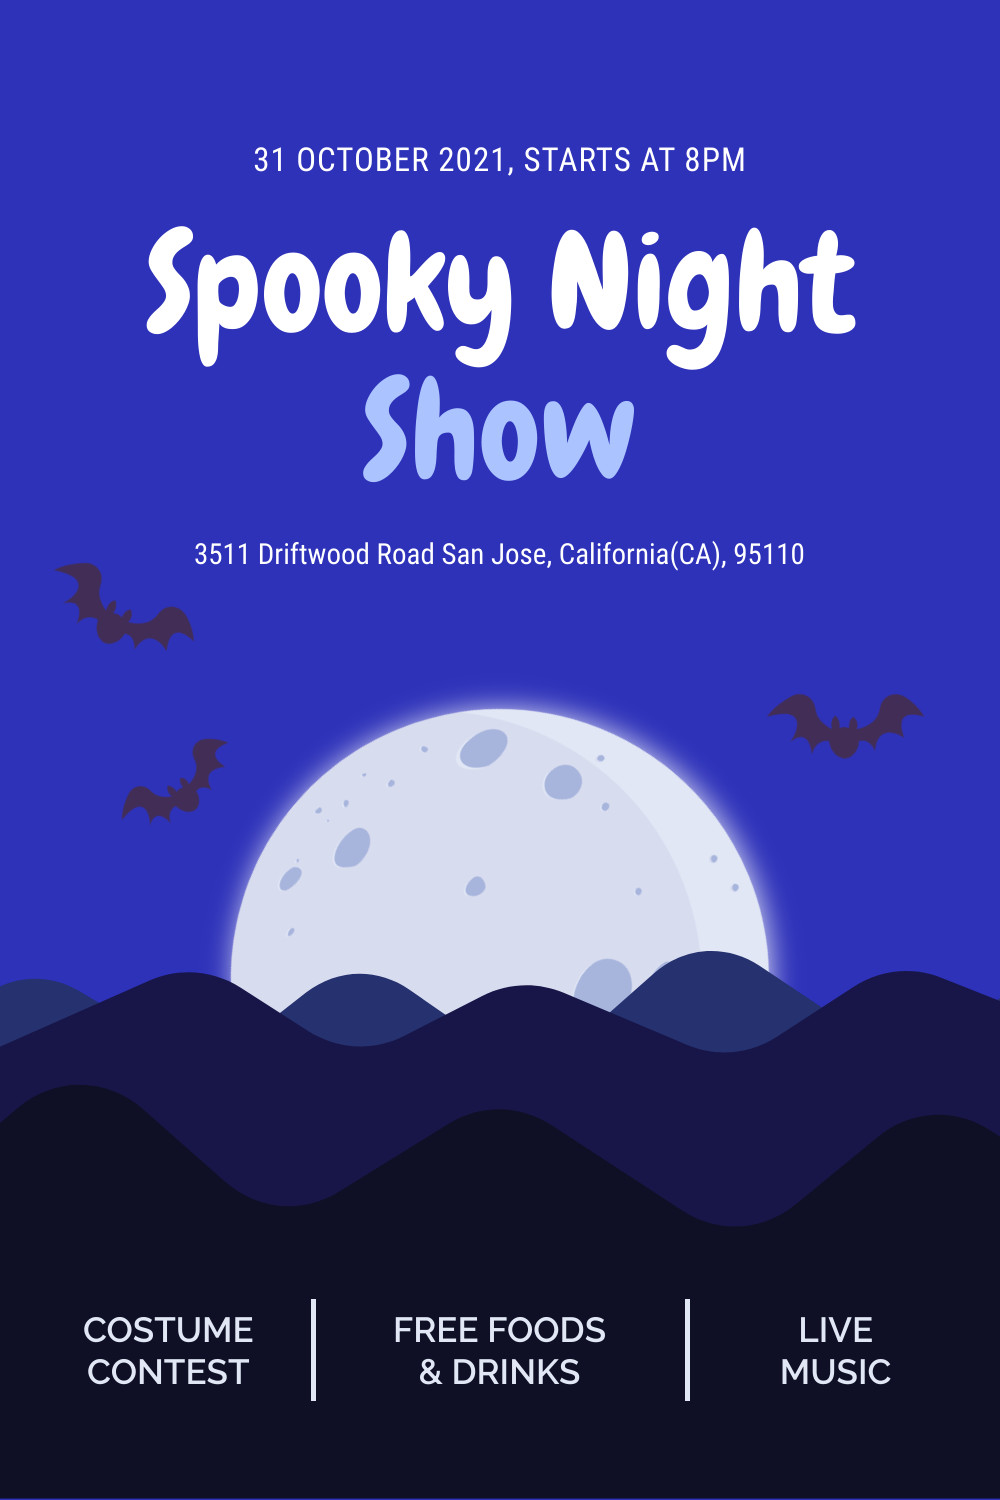 Halloween Spooky Night Show Facebook Cover 820x360